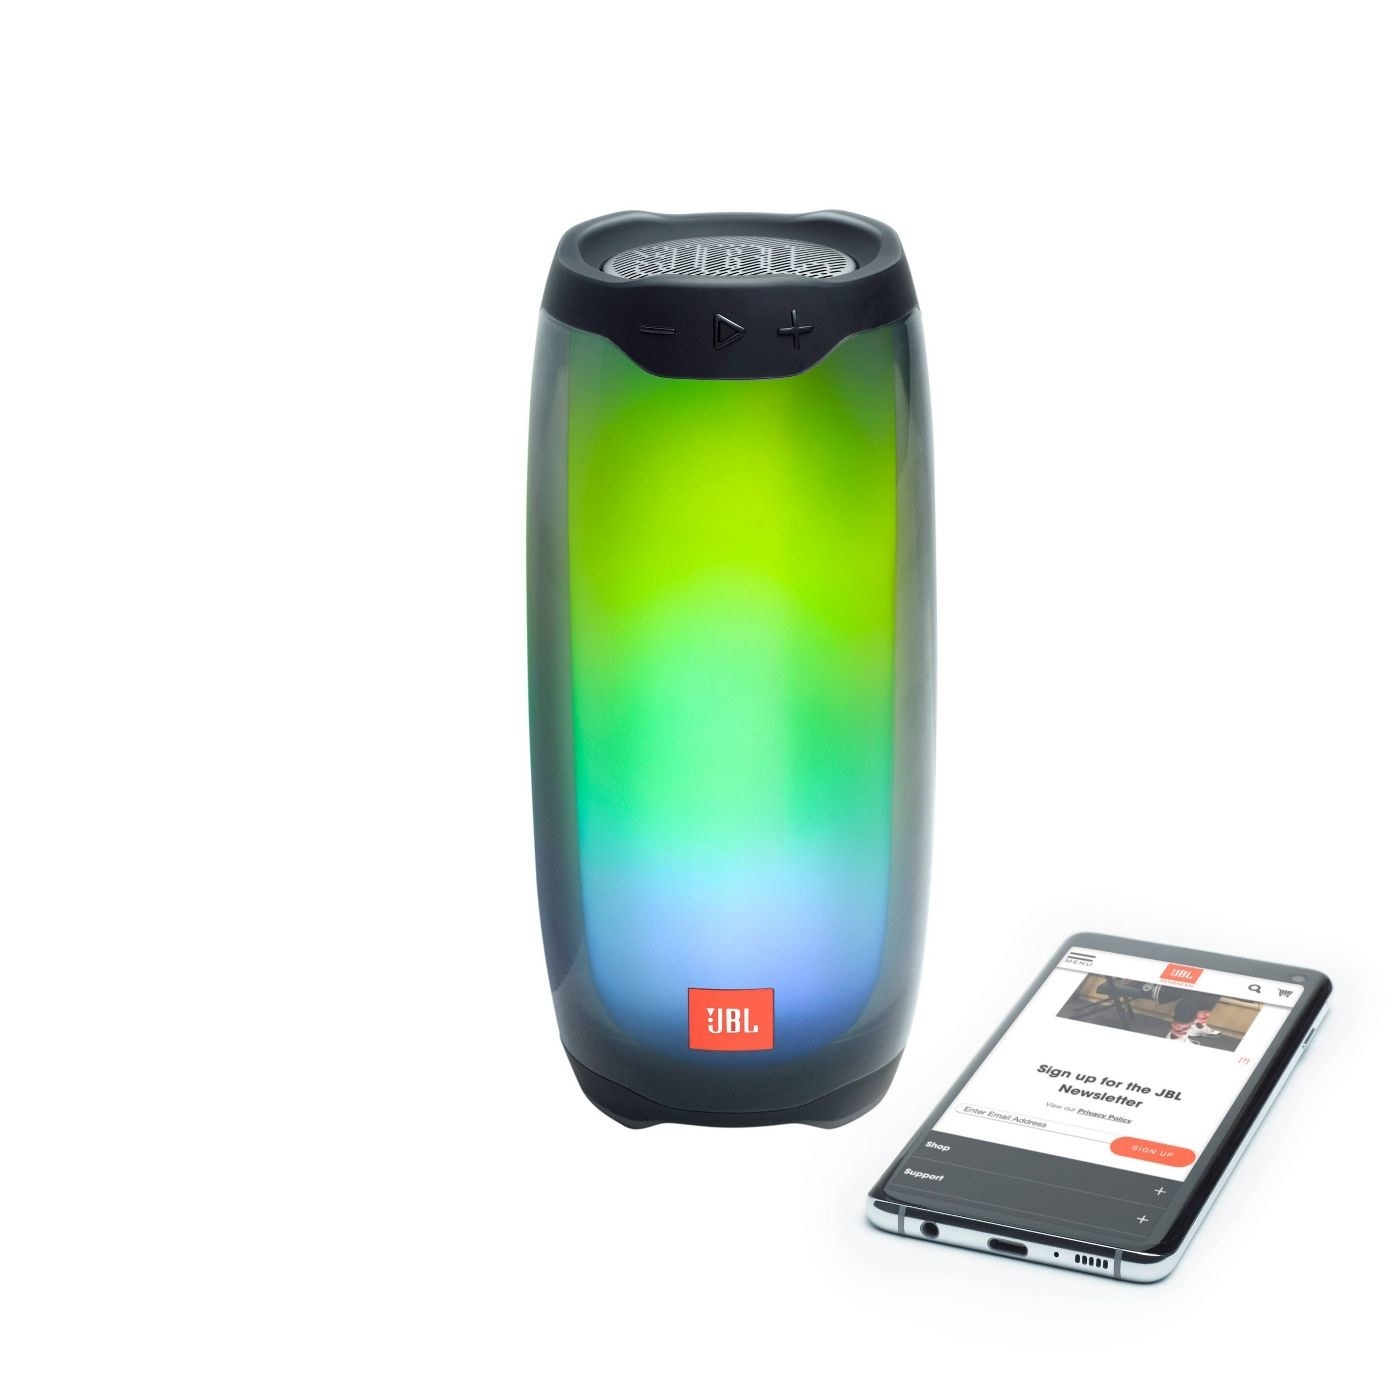 small JBL speaker lit up next to a cell phone